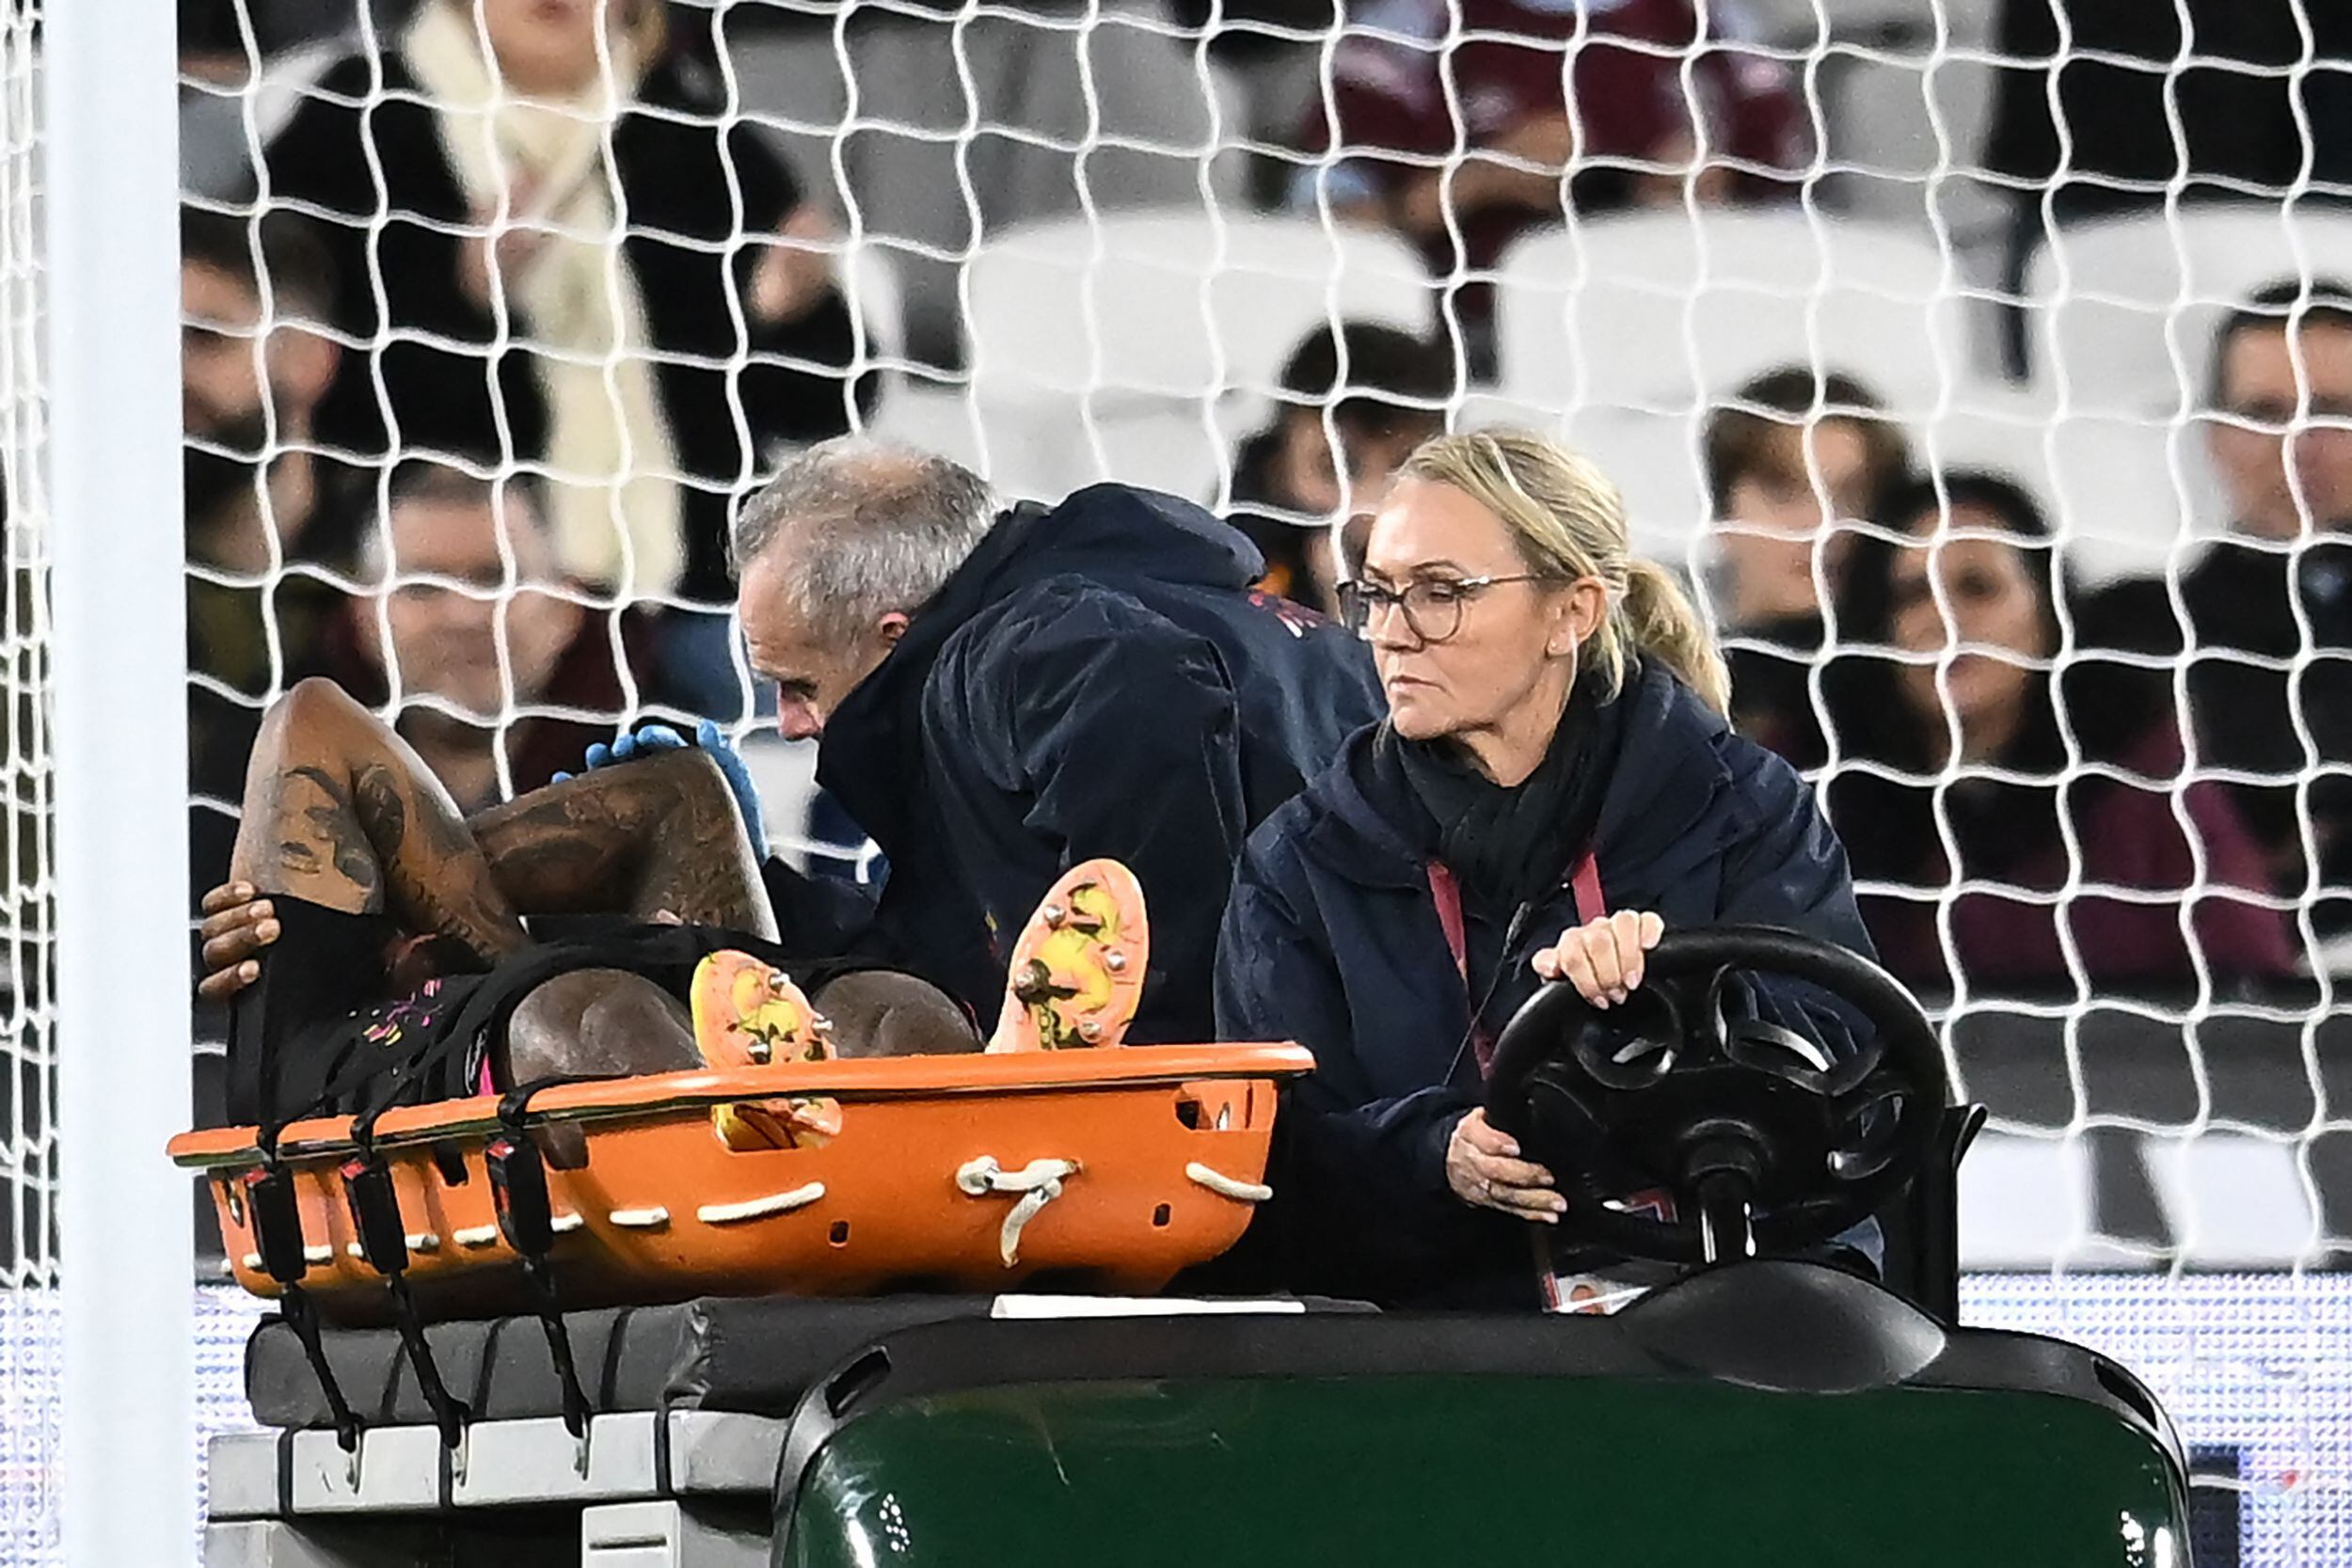 Brentford's English striker Ivan Toney is evacuated on a stretcher during the English Premier League football match between West Ham United and Brentford at the London Stadium, in London on December 30, 2022. (Photo by Ben Stansall / AFP) / RESTRICTED TO EDITORIAL USE. No use with unauthorized audio, video, data, fixture lists, club/league logos or 'live' services. Online in-match use limited to 120 images. An additional 40 images may be used in extra time. No video emulation. Social media in-match use limited to 120 images. An additional 40 images may be used in extra time. No use in betting publications, games or single club/league/player publications. / 